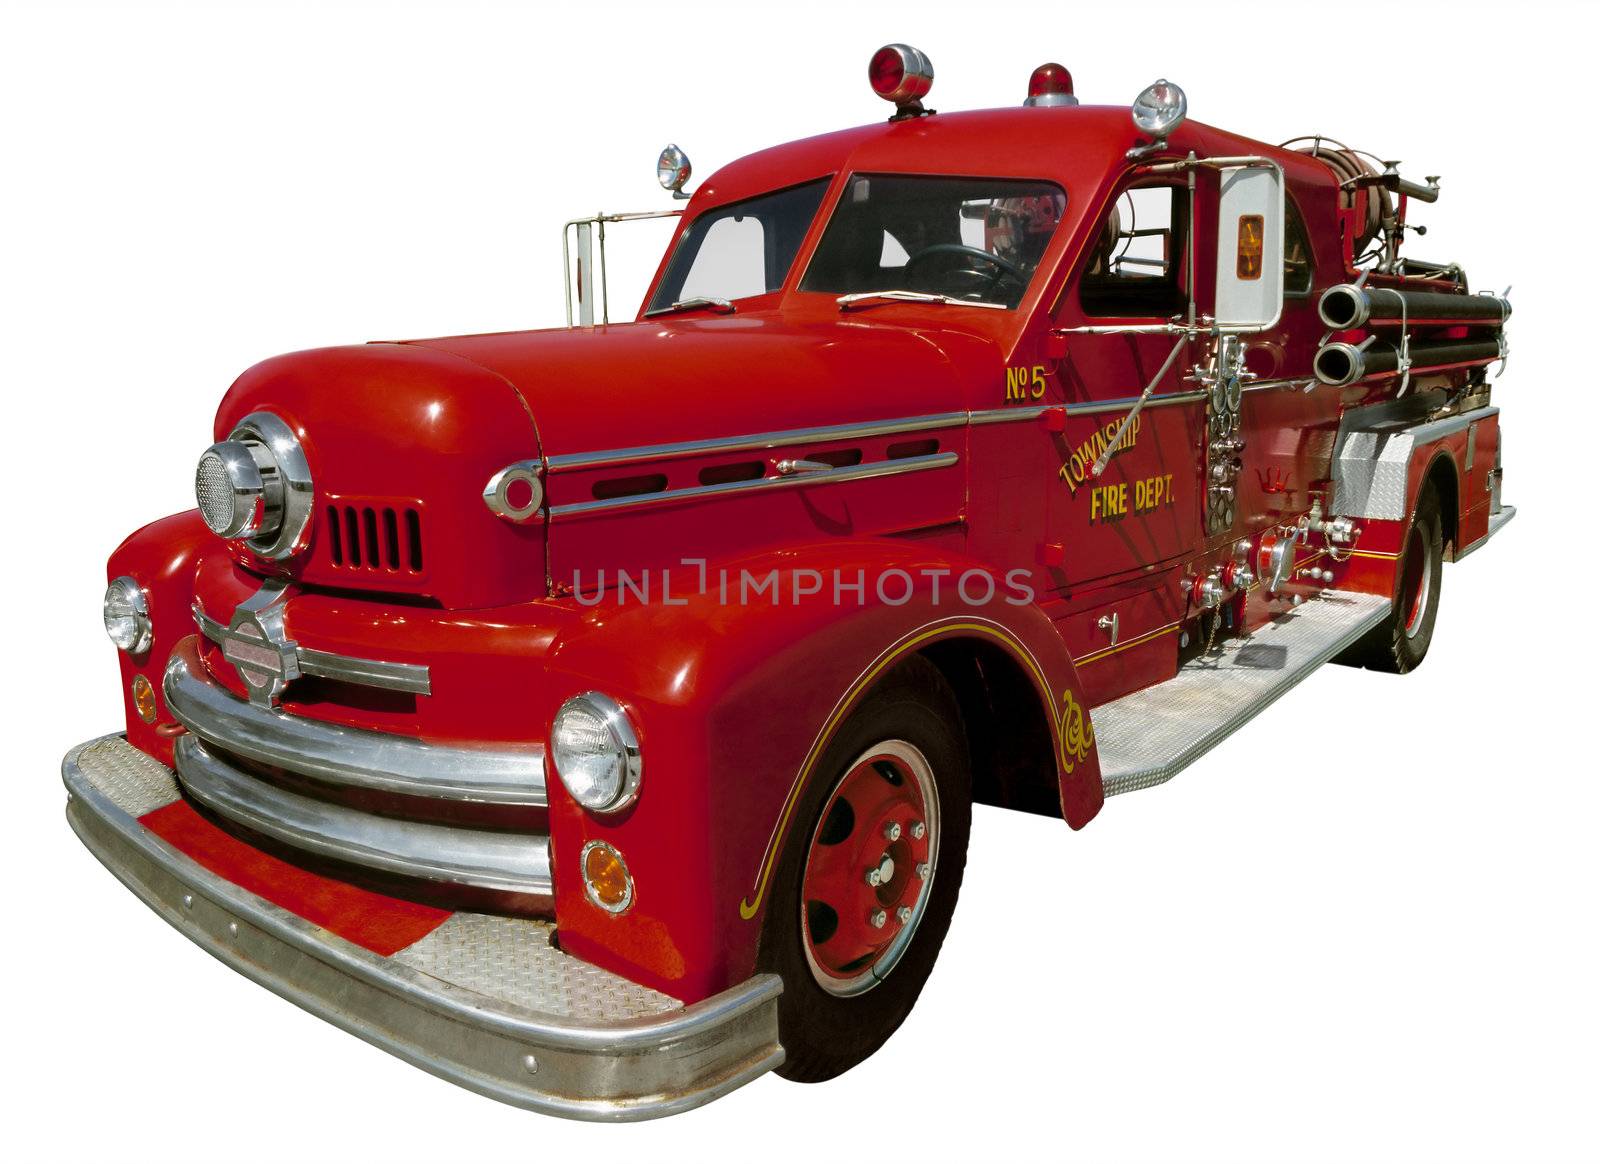 Isolated image of an old firetruck. Drum scanned from transparency.
